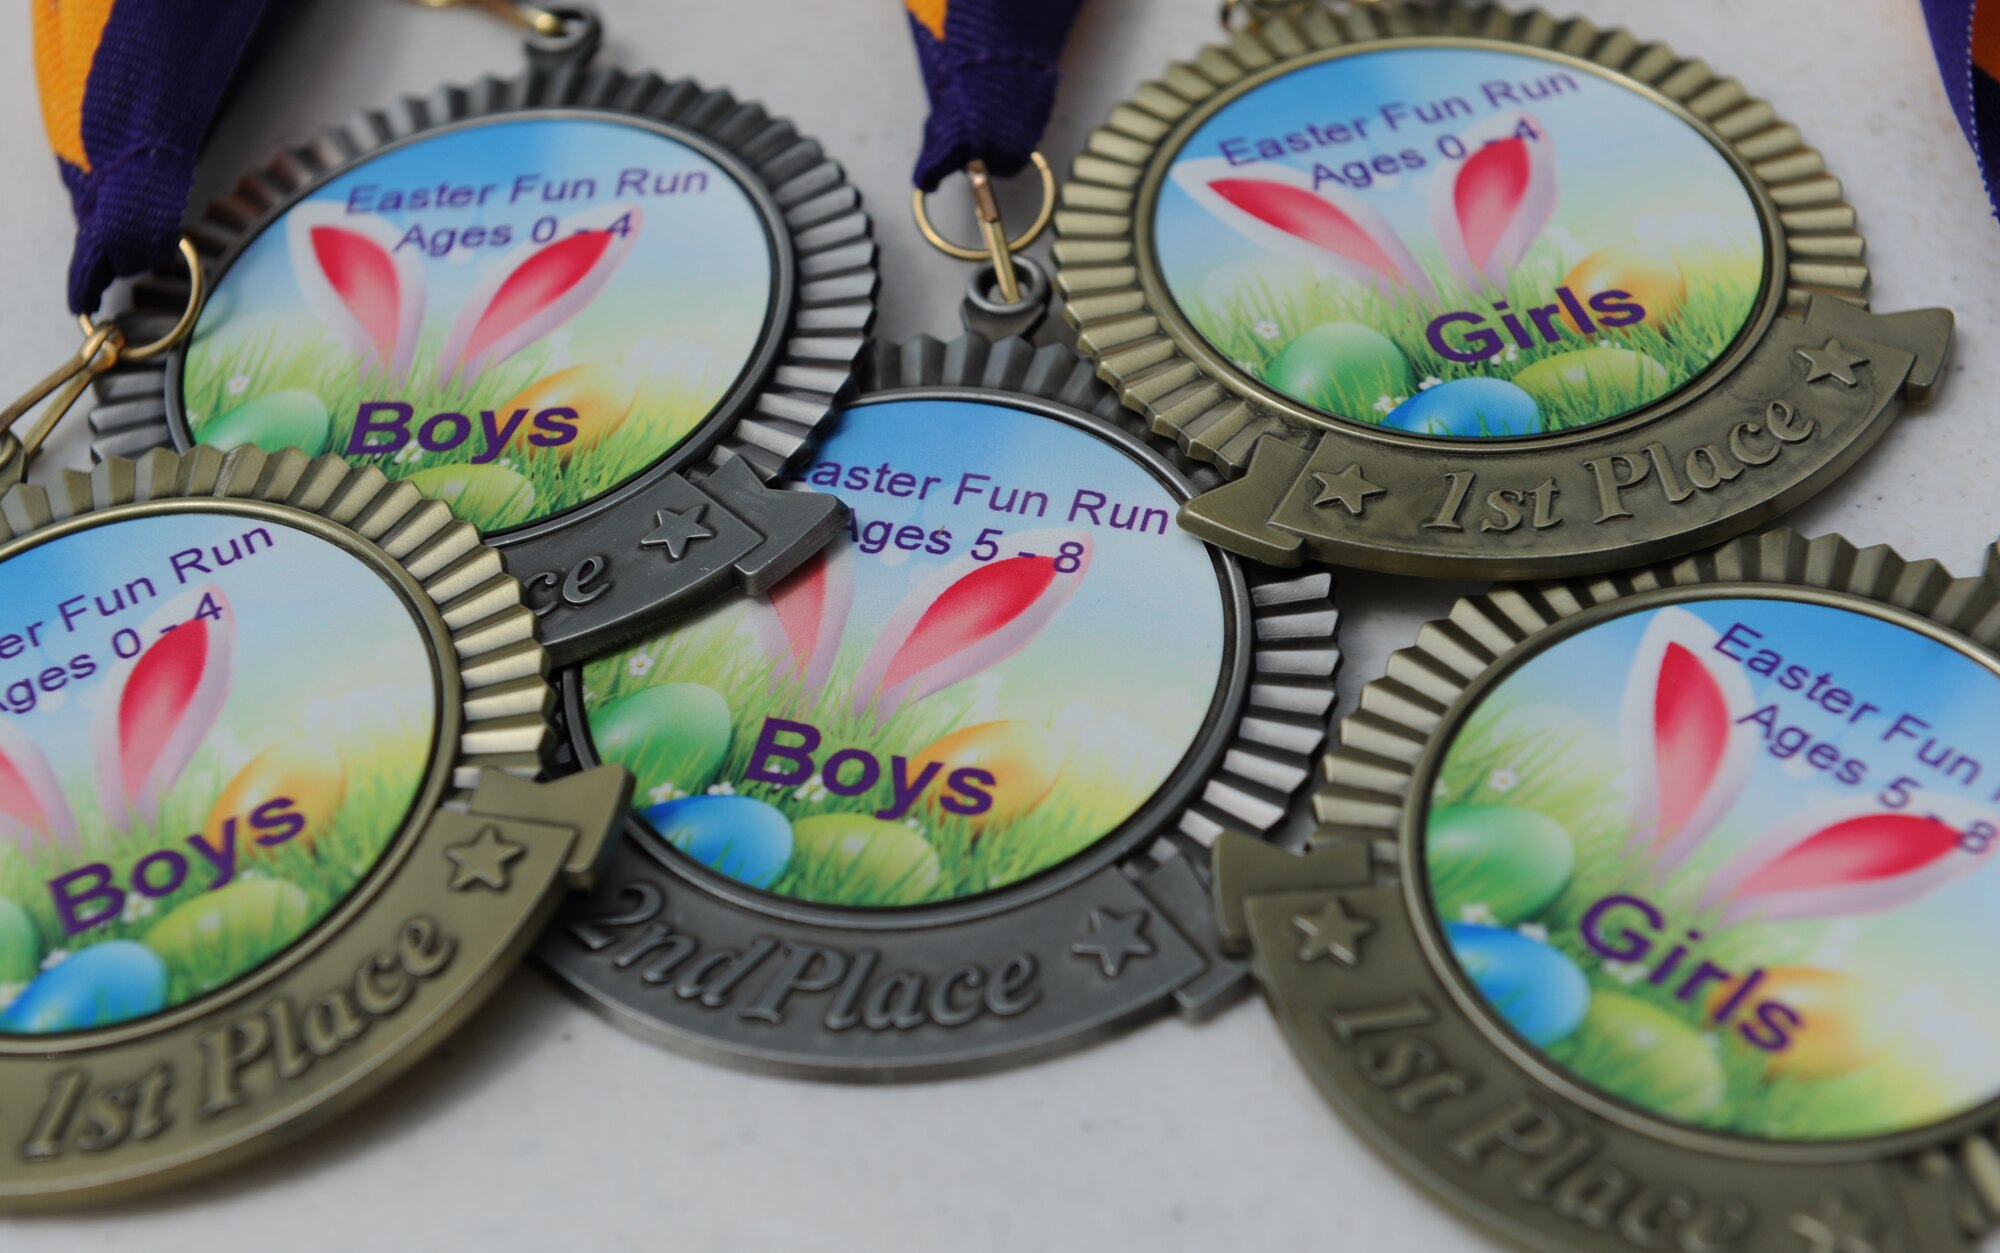 Youth Fun Run medals sit on display during Easter in the Park at the marina Mar. 26, 2016, Keesler Air Force Base, Miss. Easter in the Park also included an egg hunt, arts and crafts, games and visits with the Easter Bunny. (U.S. Air Force photo by Kemberly Groue)